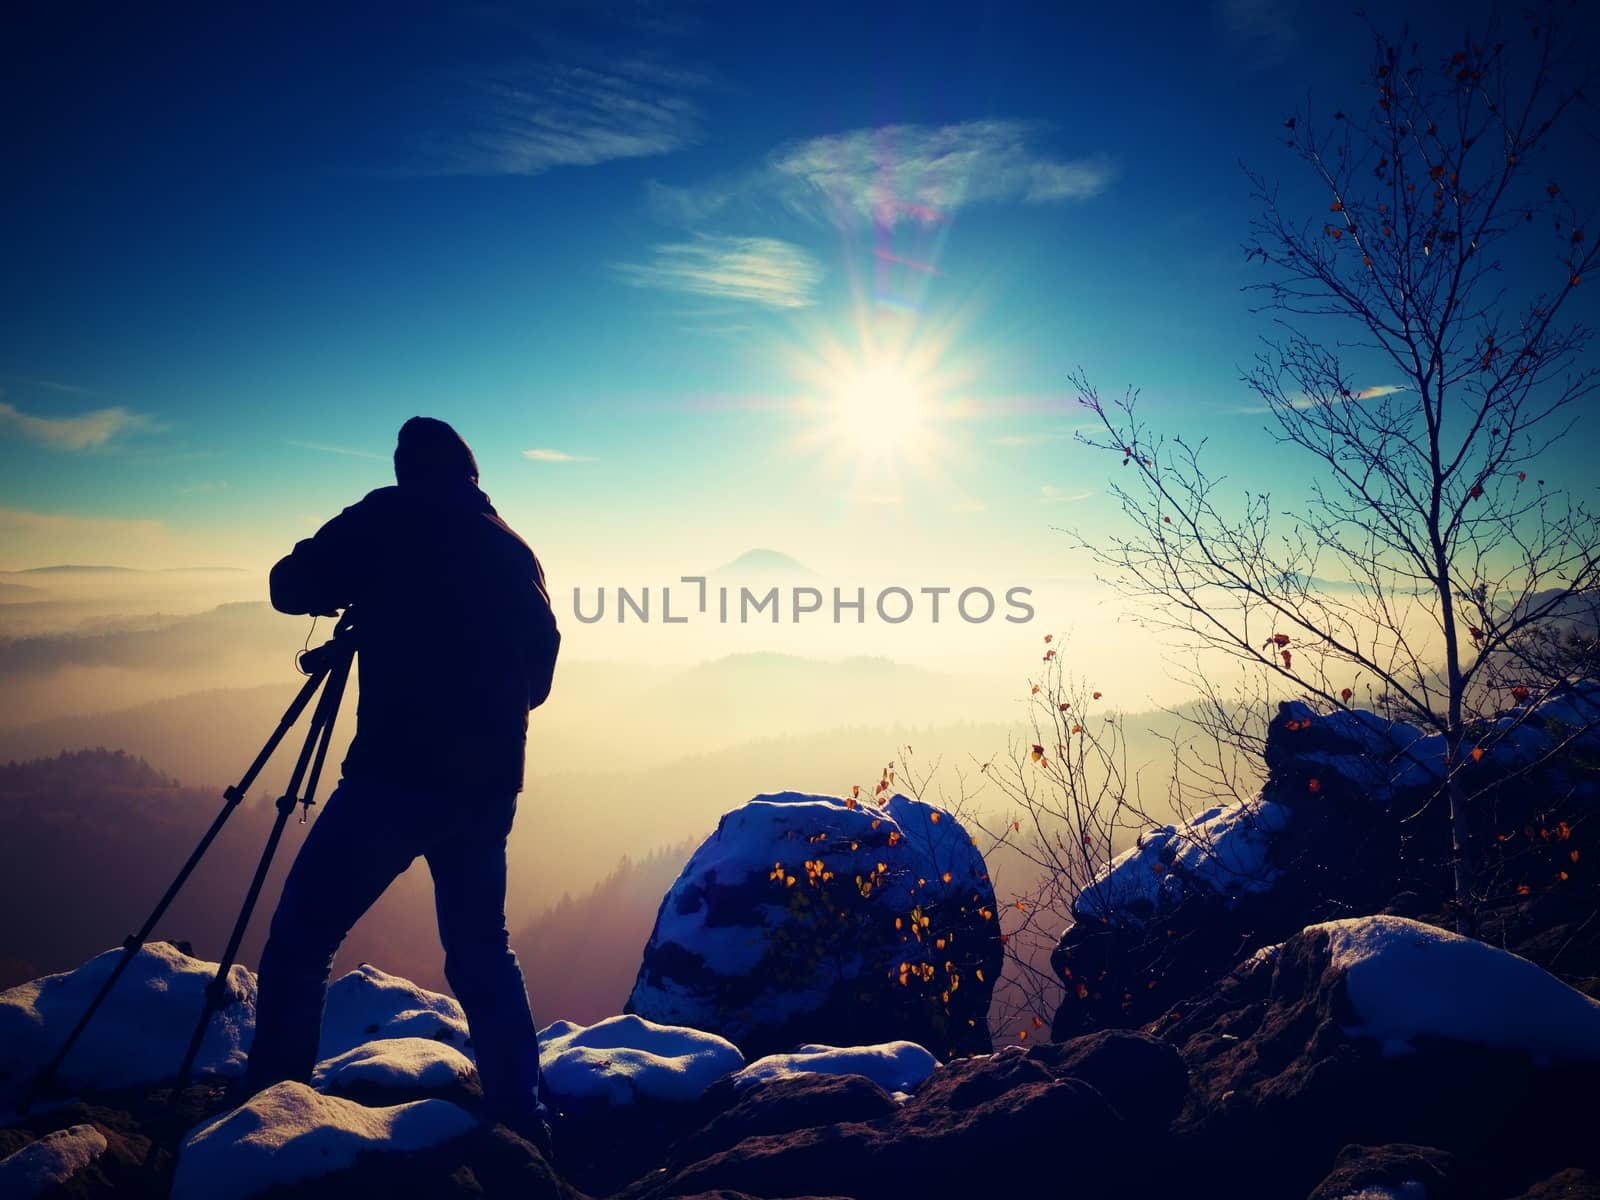 Sunny early winter  morning. Photographer preparing camera on tripod. Snowy rocks, in valley bellow colorful leaves forest. View over misty and foggy valley to Sun.